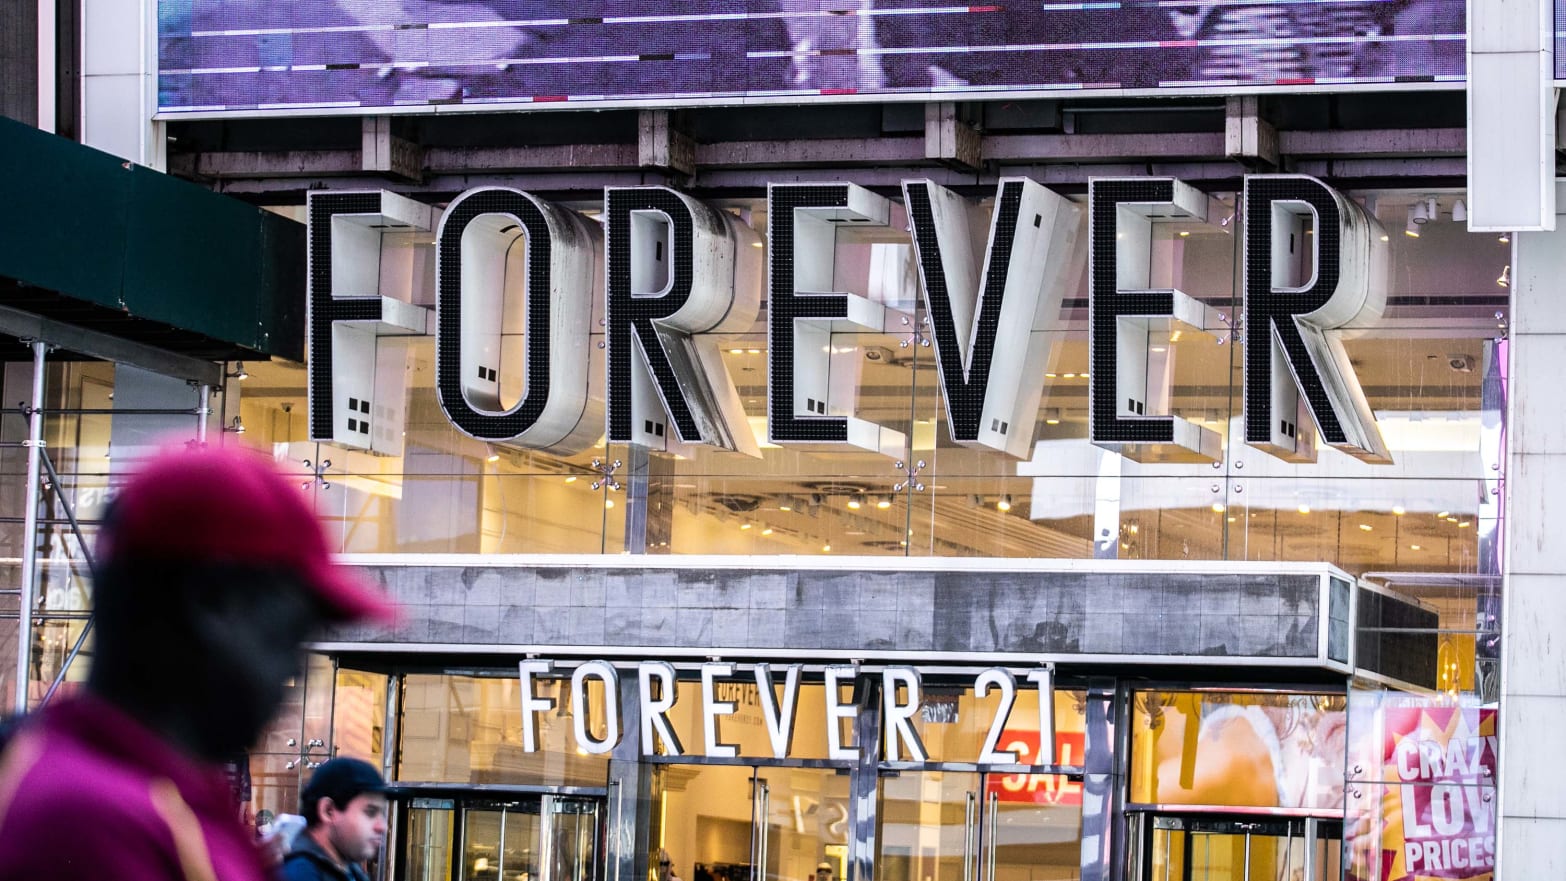 Forever 21 Times Square News Photo - Getty Images